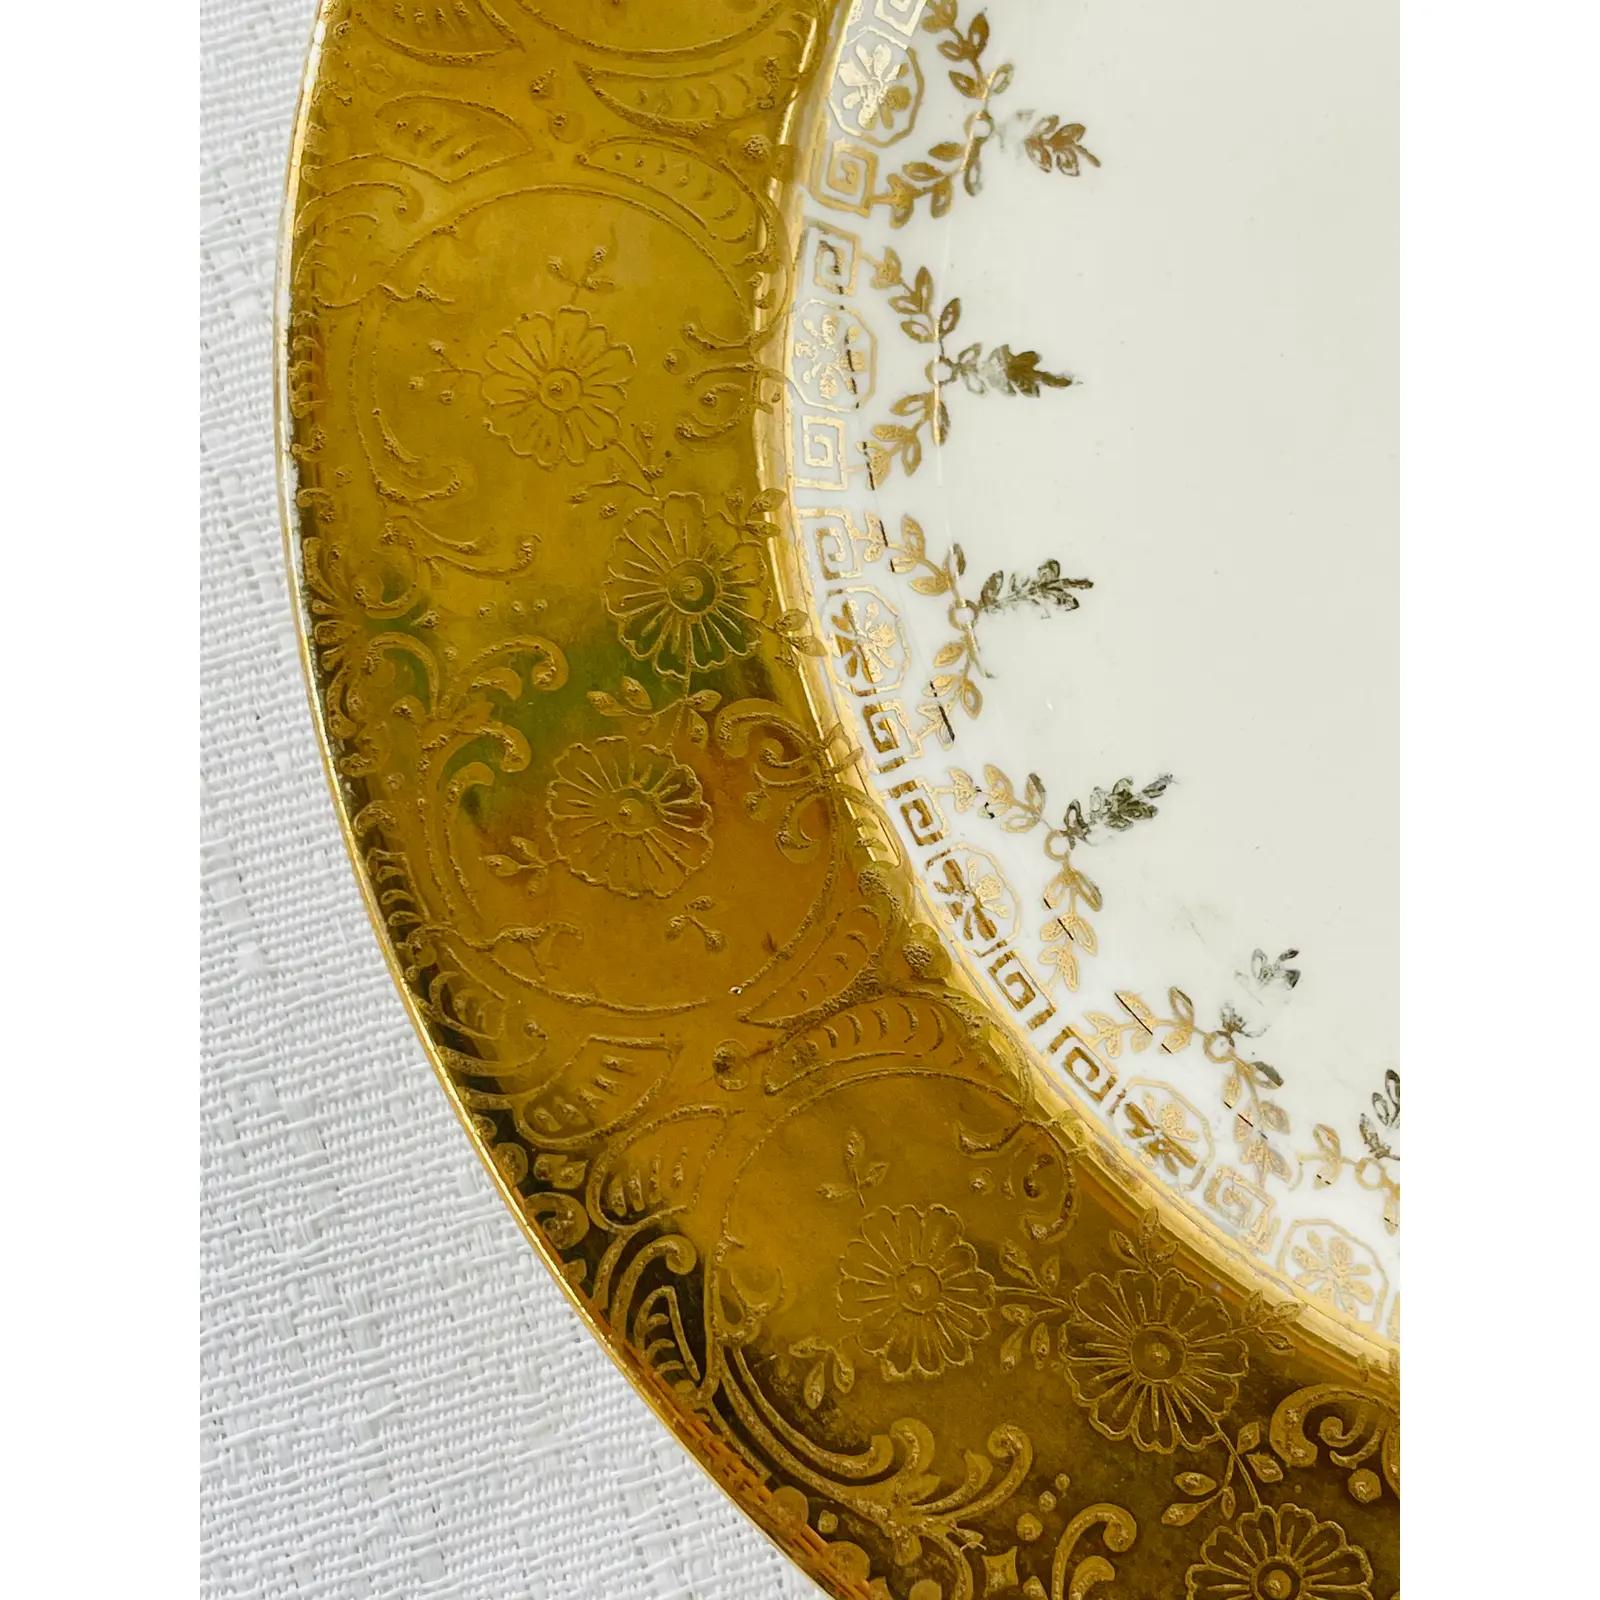 Late 20th Century Federal Style Sabin Crest -O- Gold Warranted 22K Gold Dinner Plate, Set of 6 For Sale